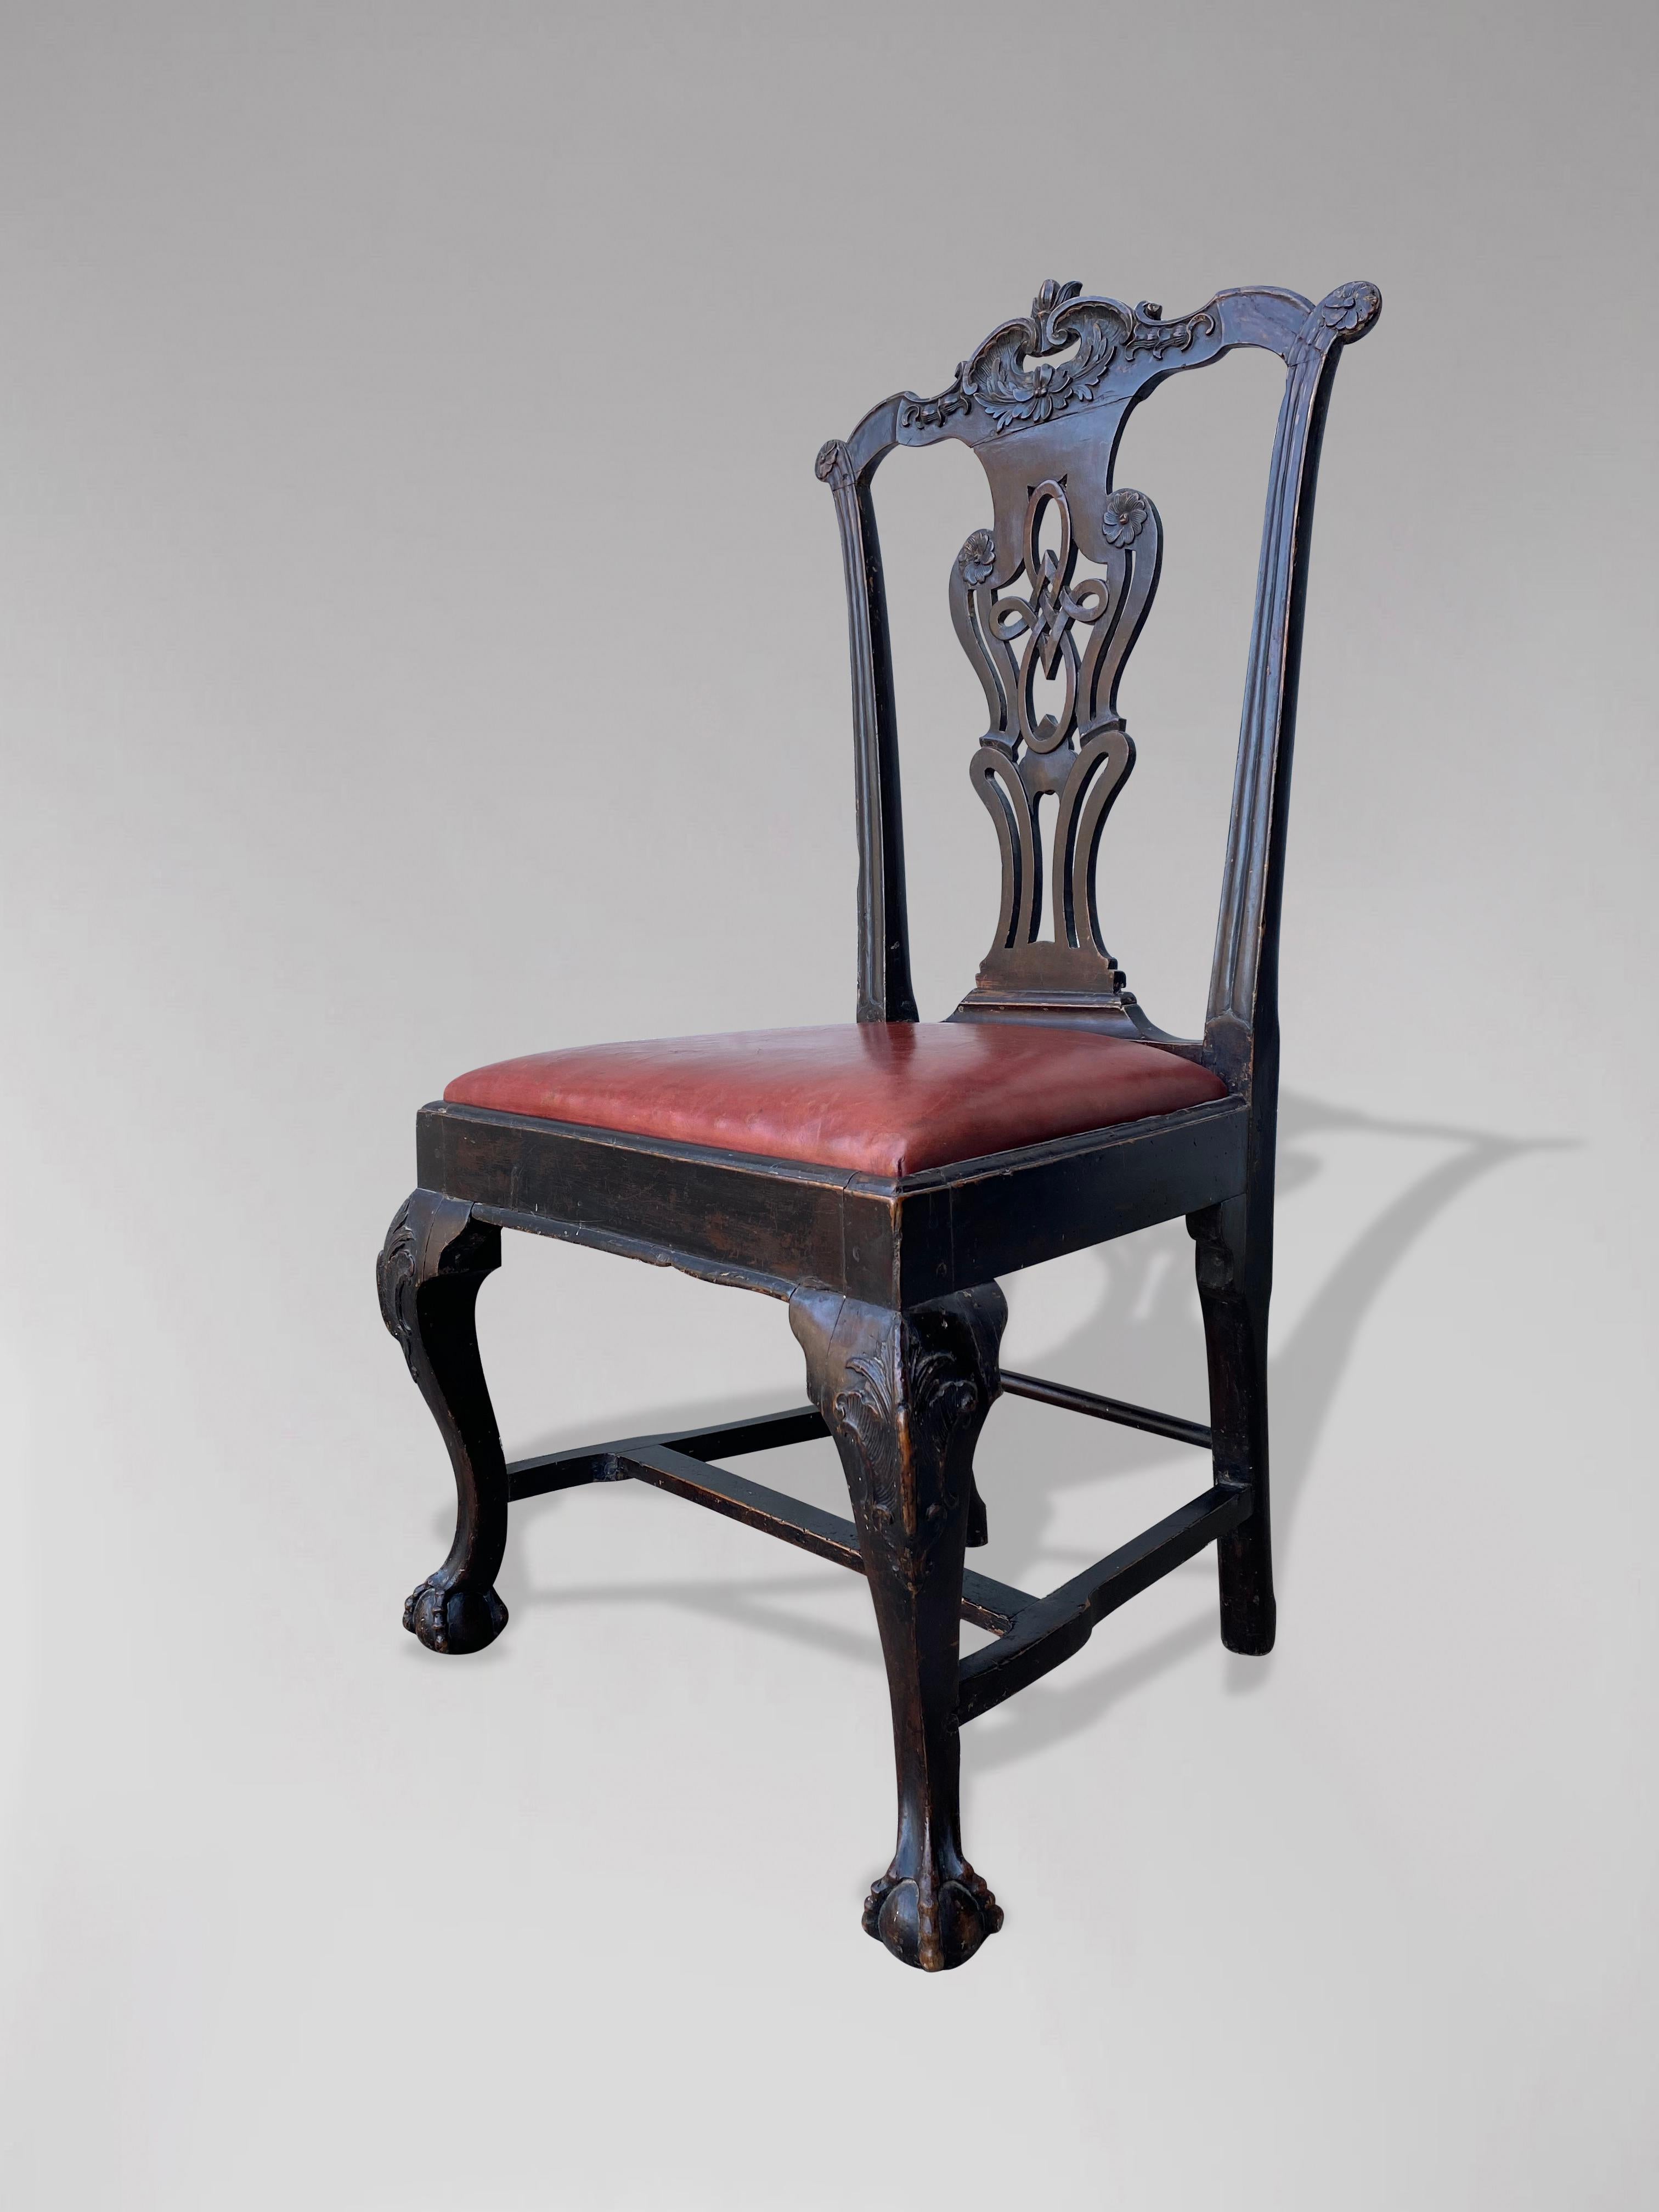 British Edwardian Period Carved Painted Chippendale Single Chair For Sale